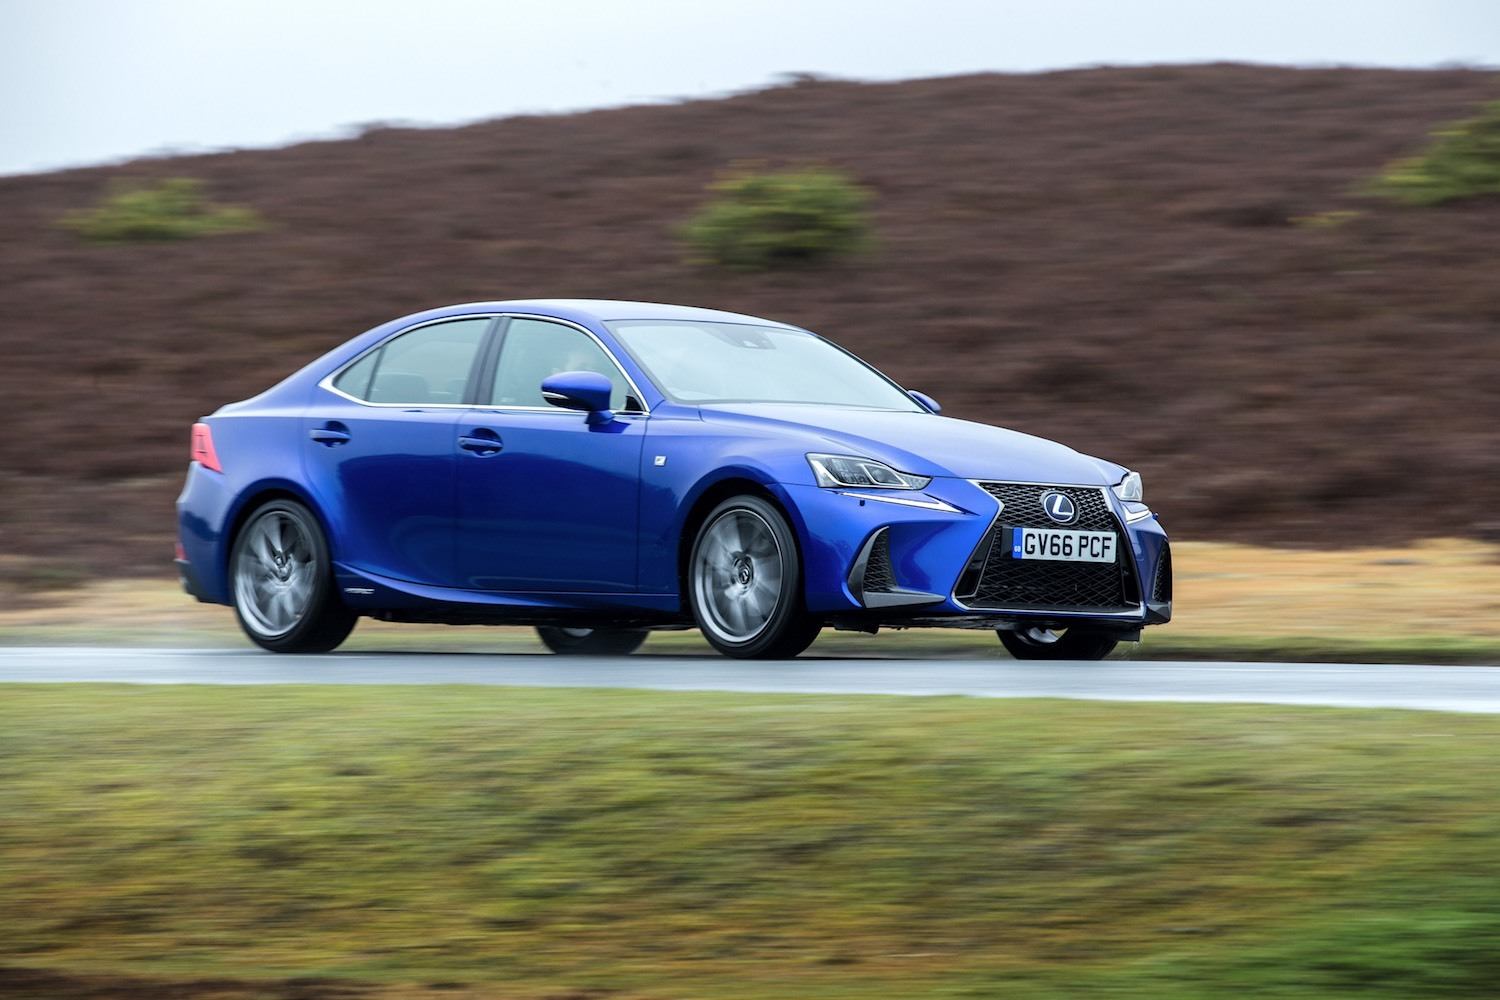 Neil Lyndon reviews the Lexus IS300h for Drive 1